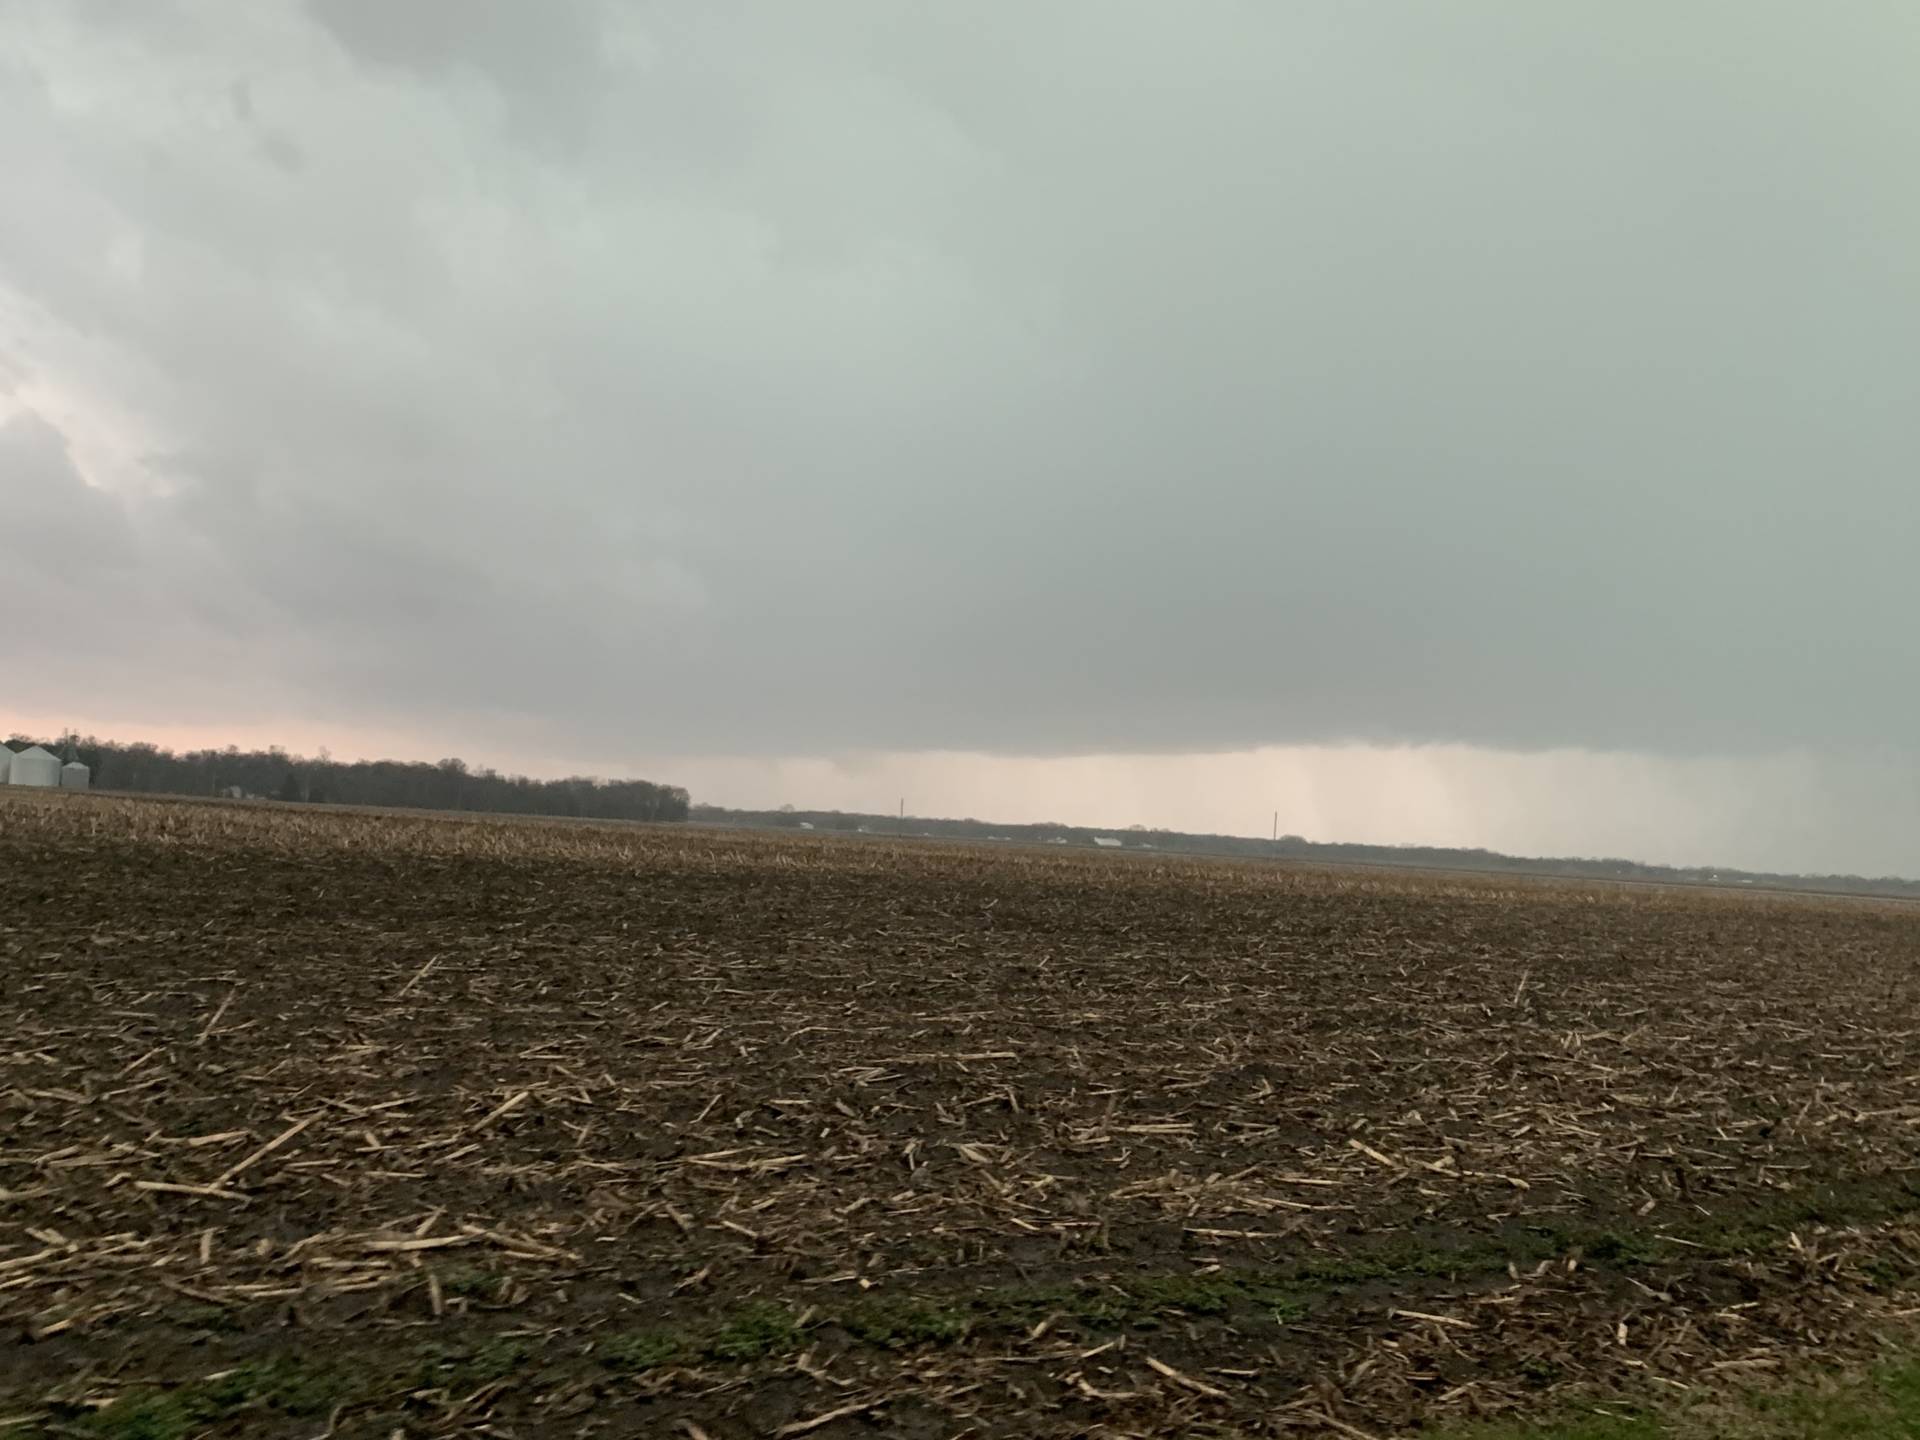 With @PlanfieldWx in Athens, IL with a well defined wall cloud possibly something under smth it as well. #ilwx